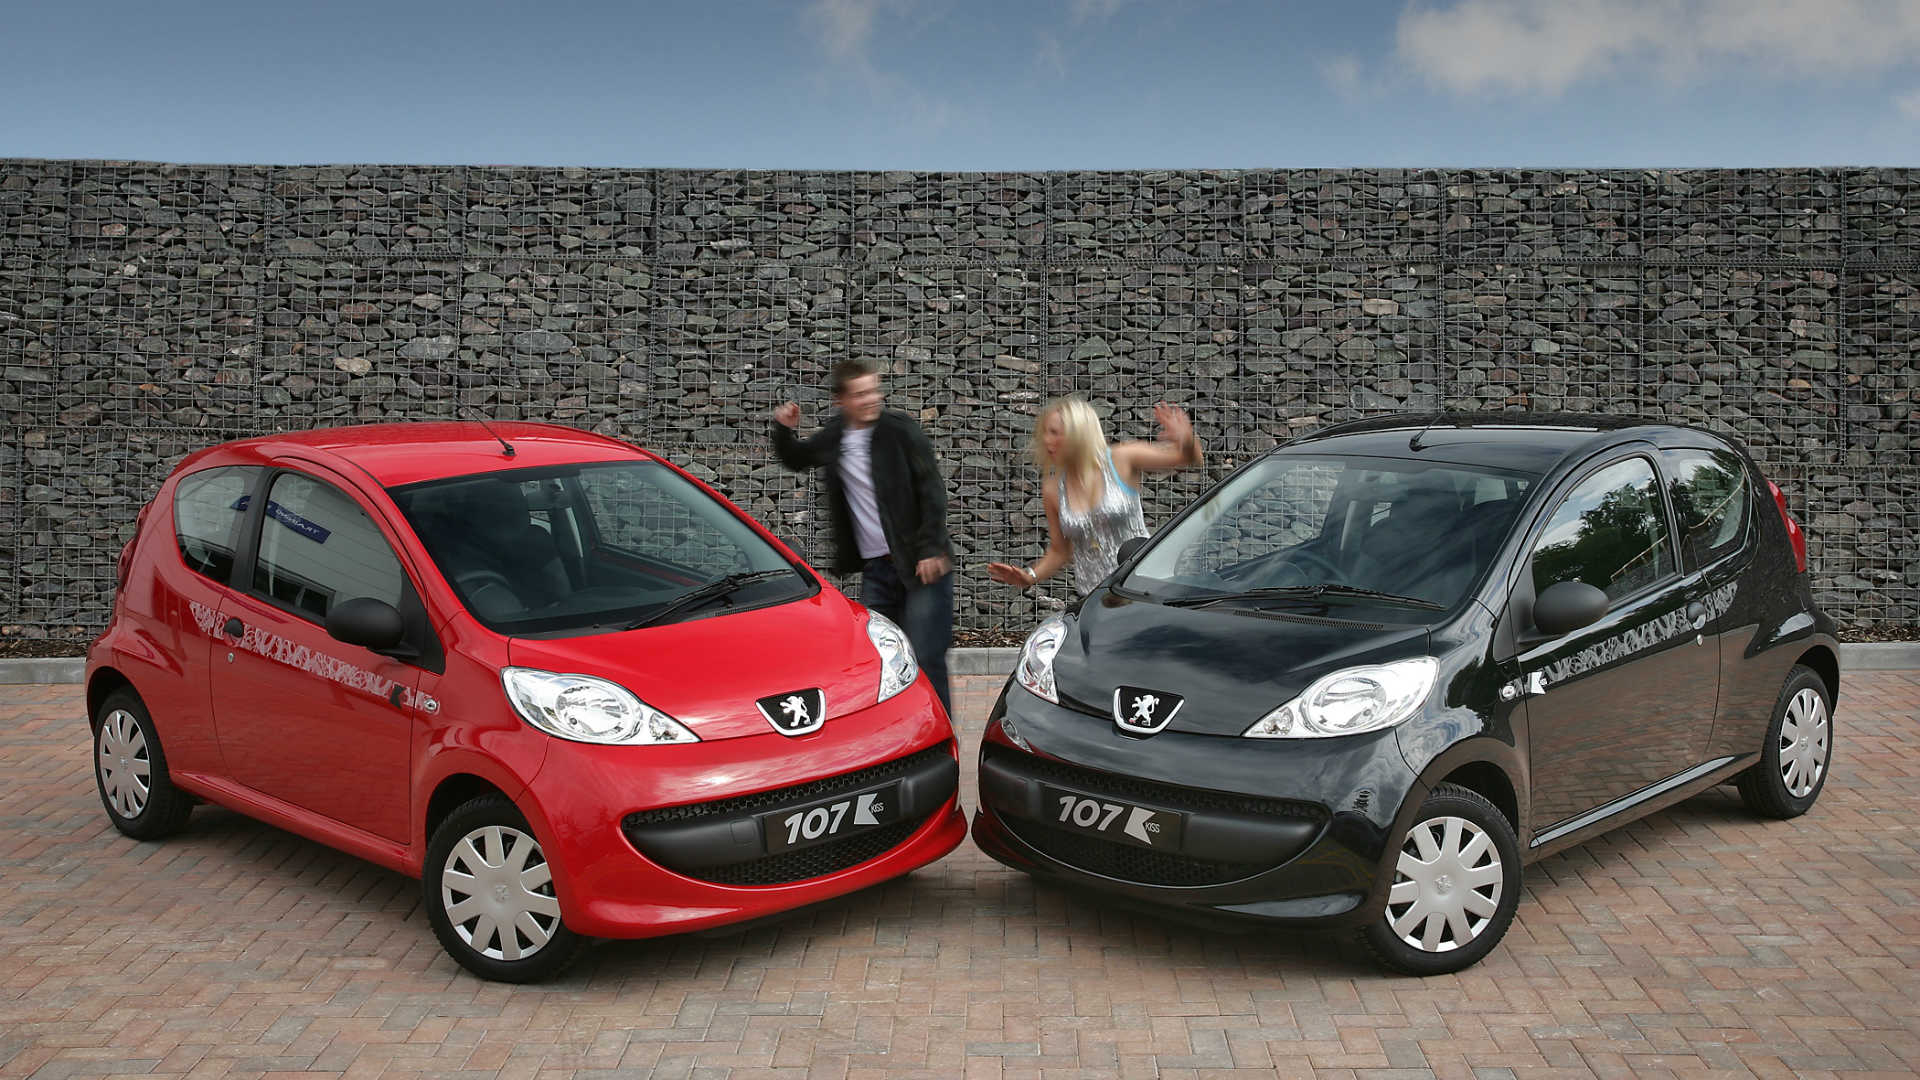 The 10 Cheapest Cars For 17 Year Olds To Insure Motoring in measurements 1920 X 1080